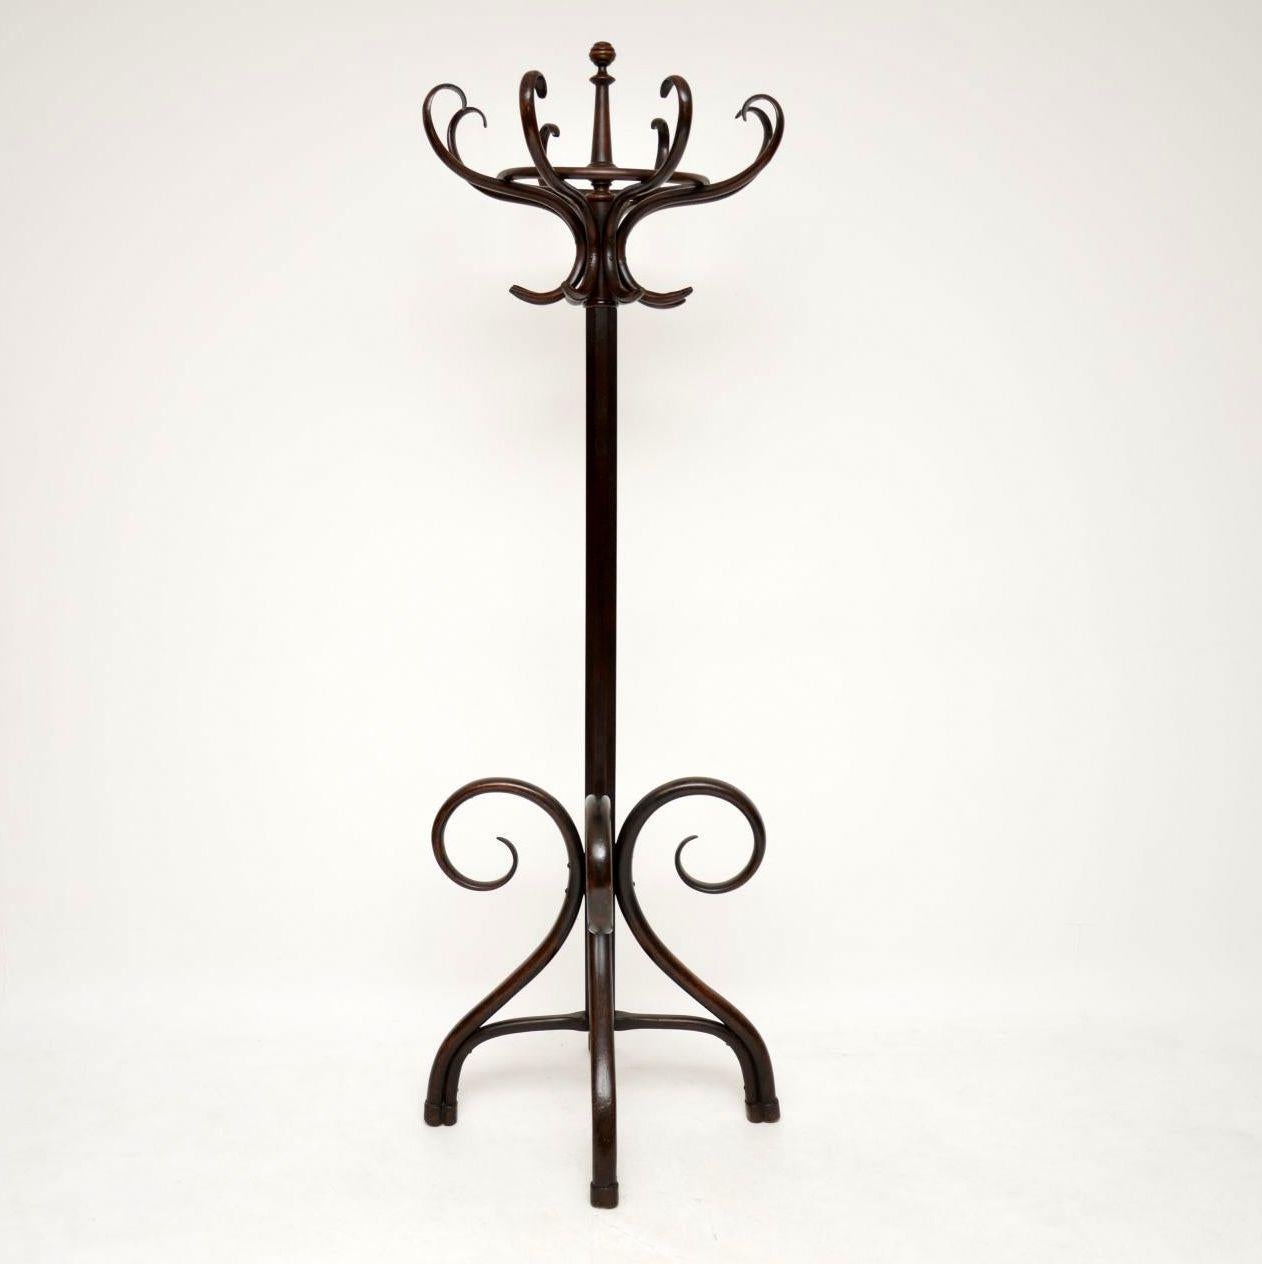 This is a fine example of an antique bentwood hat & coat stand in excellent condition, with a lovely warm original colour & plenty of character. I think it was made by Thonet, or if not it certainly is of the same period from around the 1880-90’s.